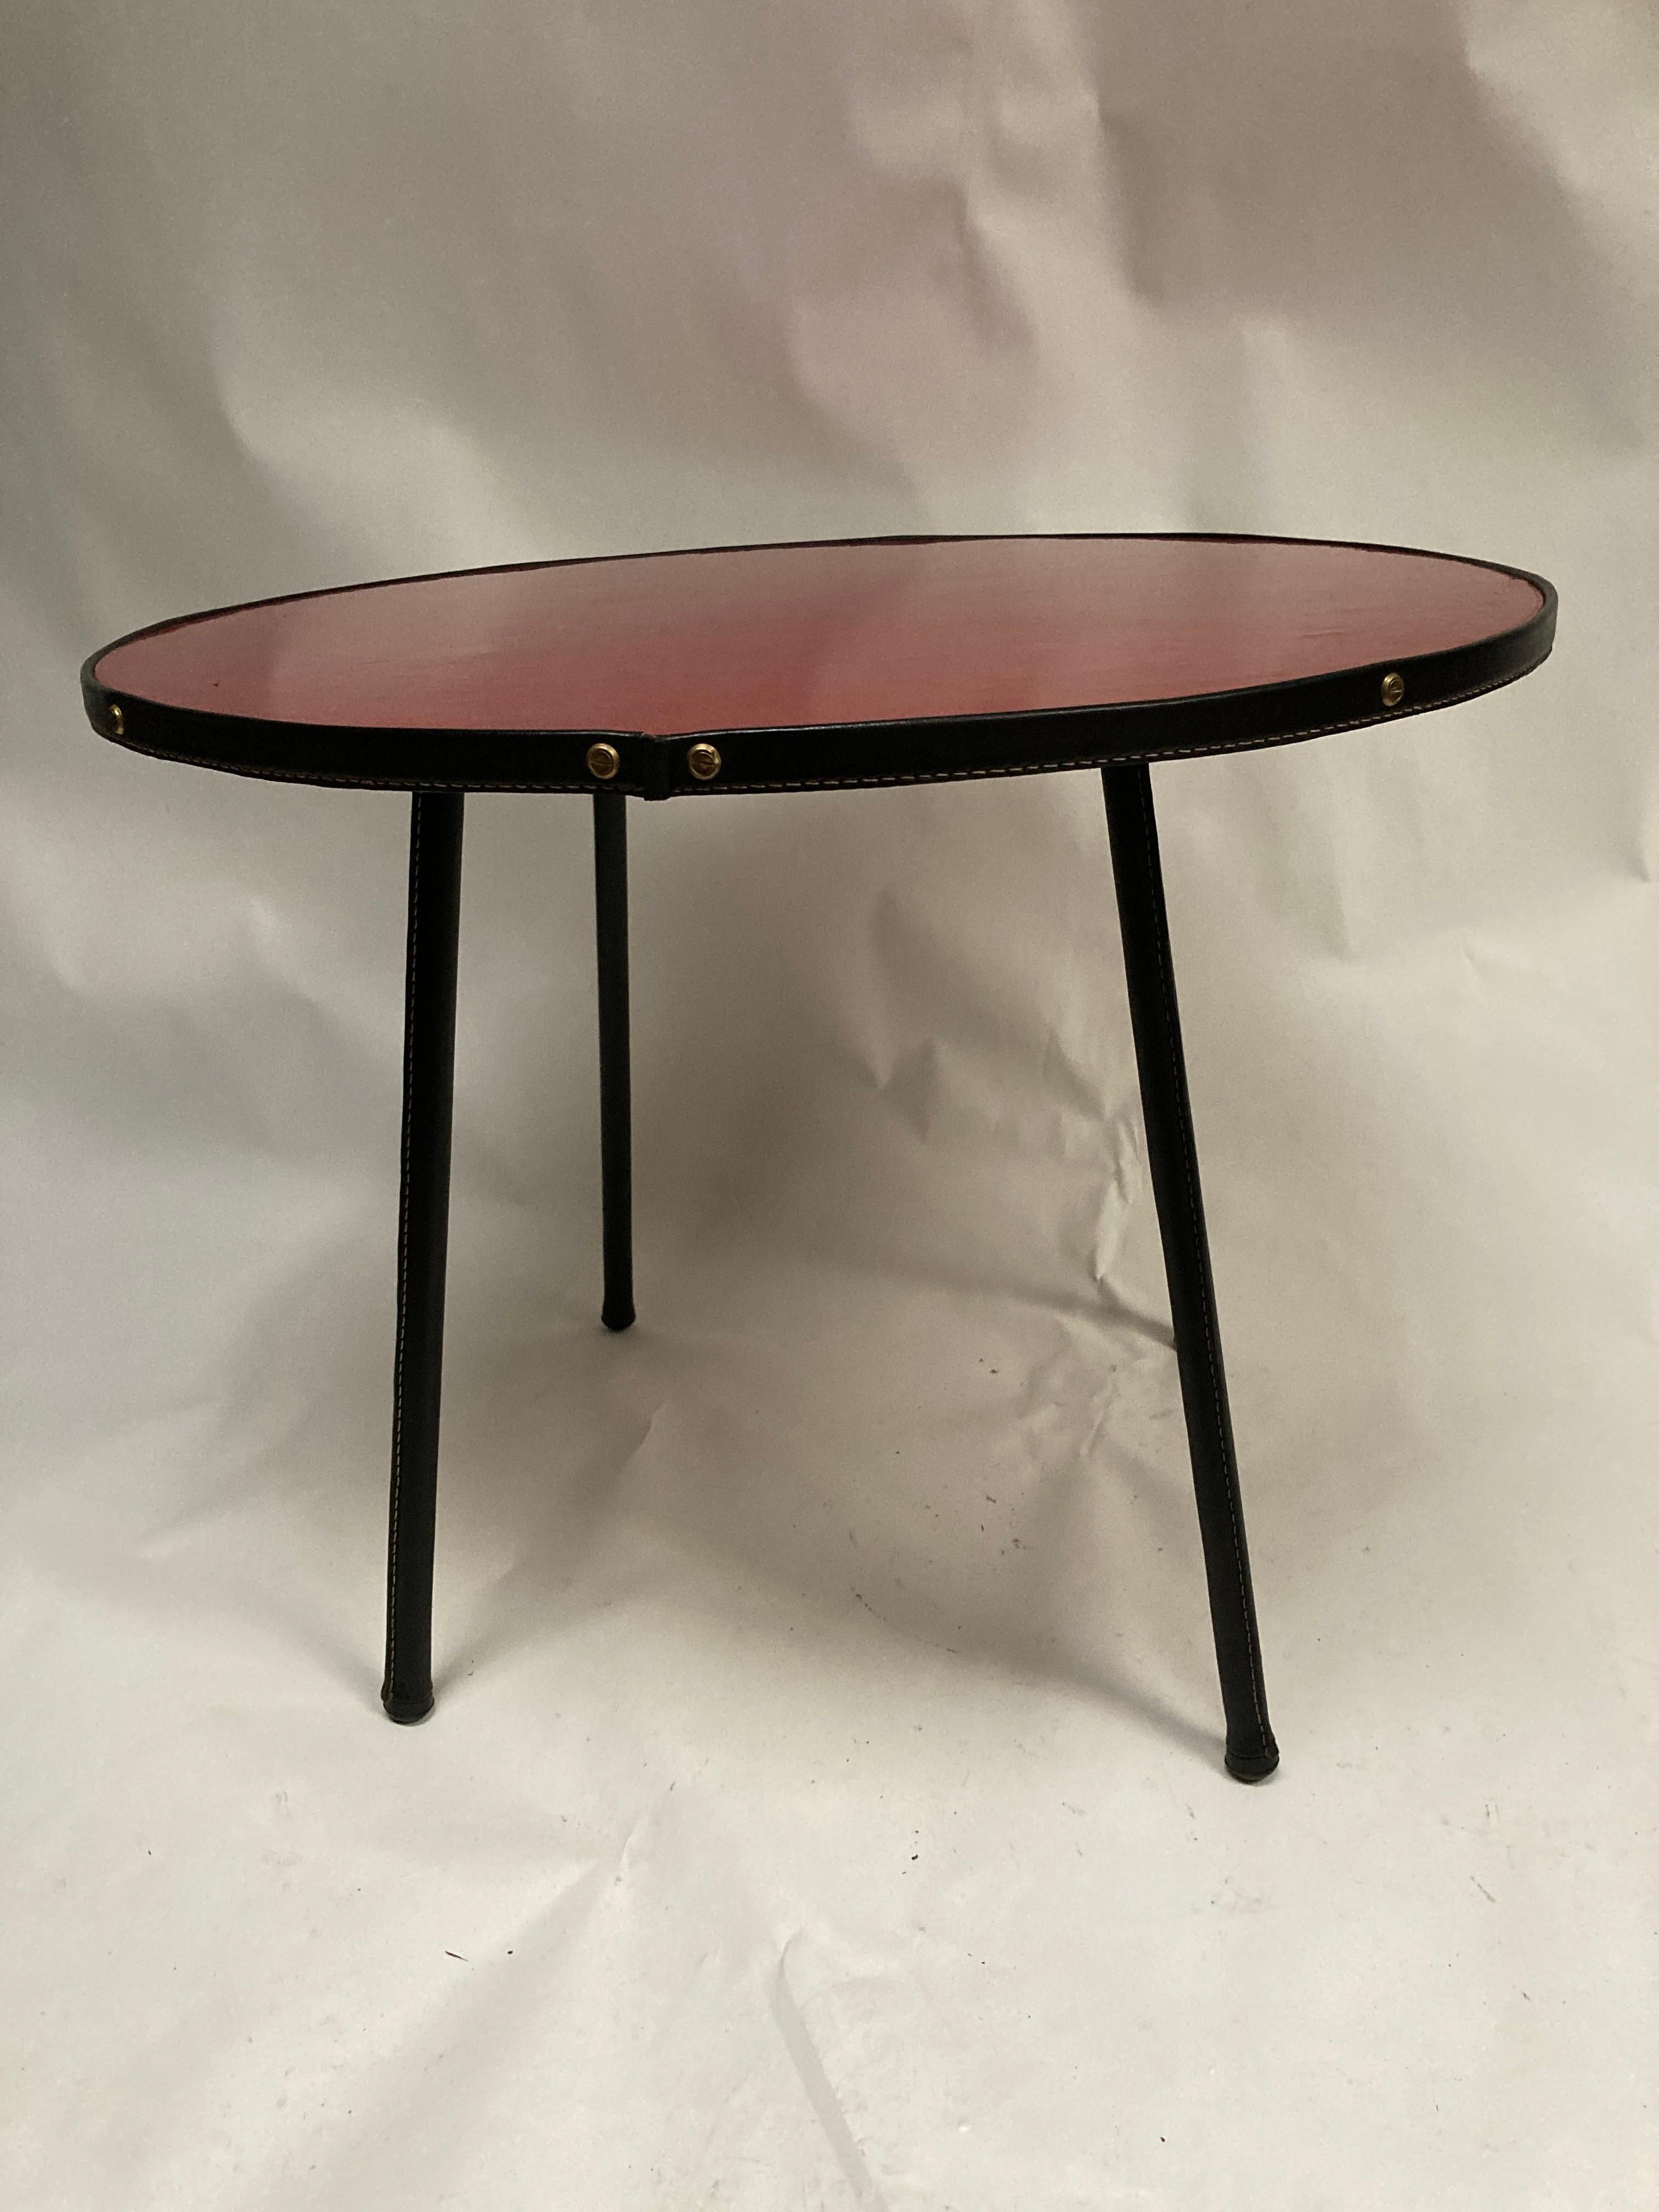 1950's Stitched Leather and formica Circular table by Jacques Adnet For Sale 2